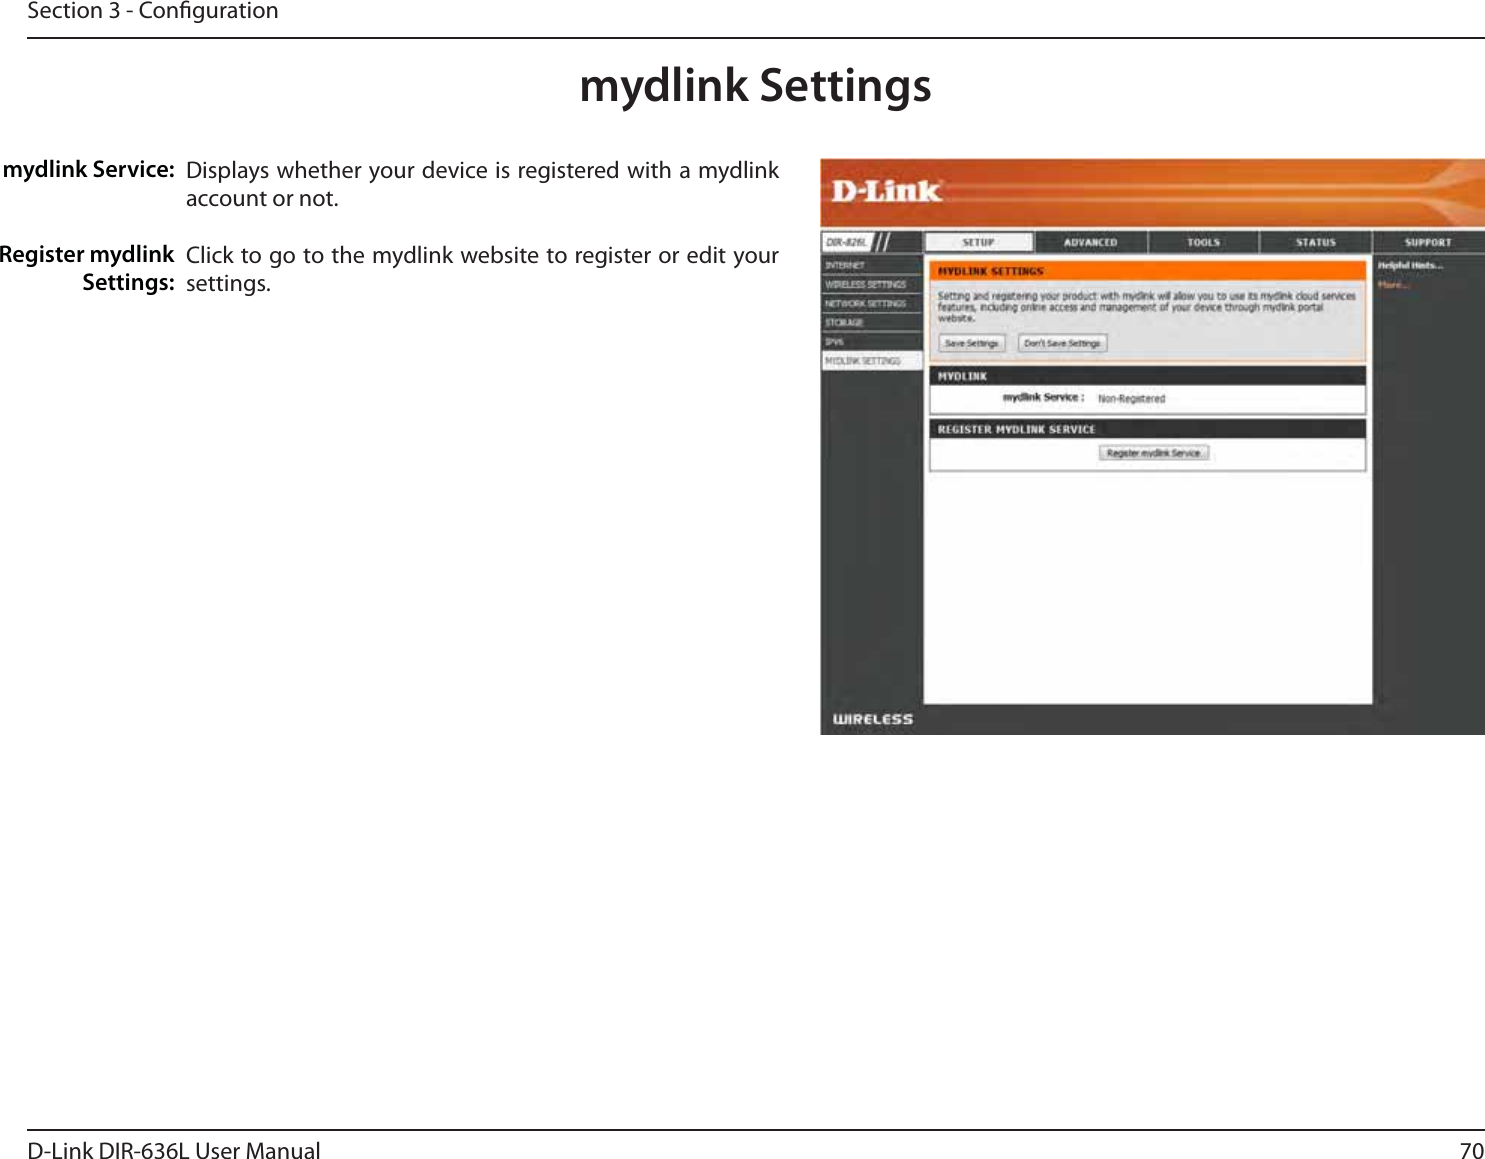 70D-Link DIR-636L User ManualSection 3 - Congurationmydlink SettingsDisplays whether your device is registered with a mydlink account or not.Click to go to the mydlink website to register or edit your settings.mydlink Service:Register mydlink Settings: